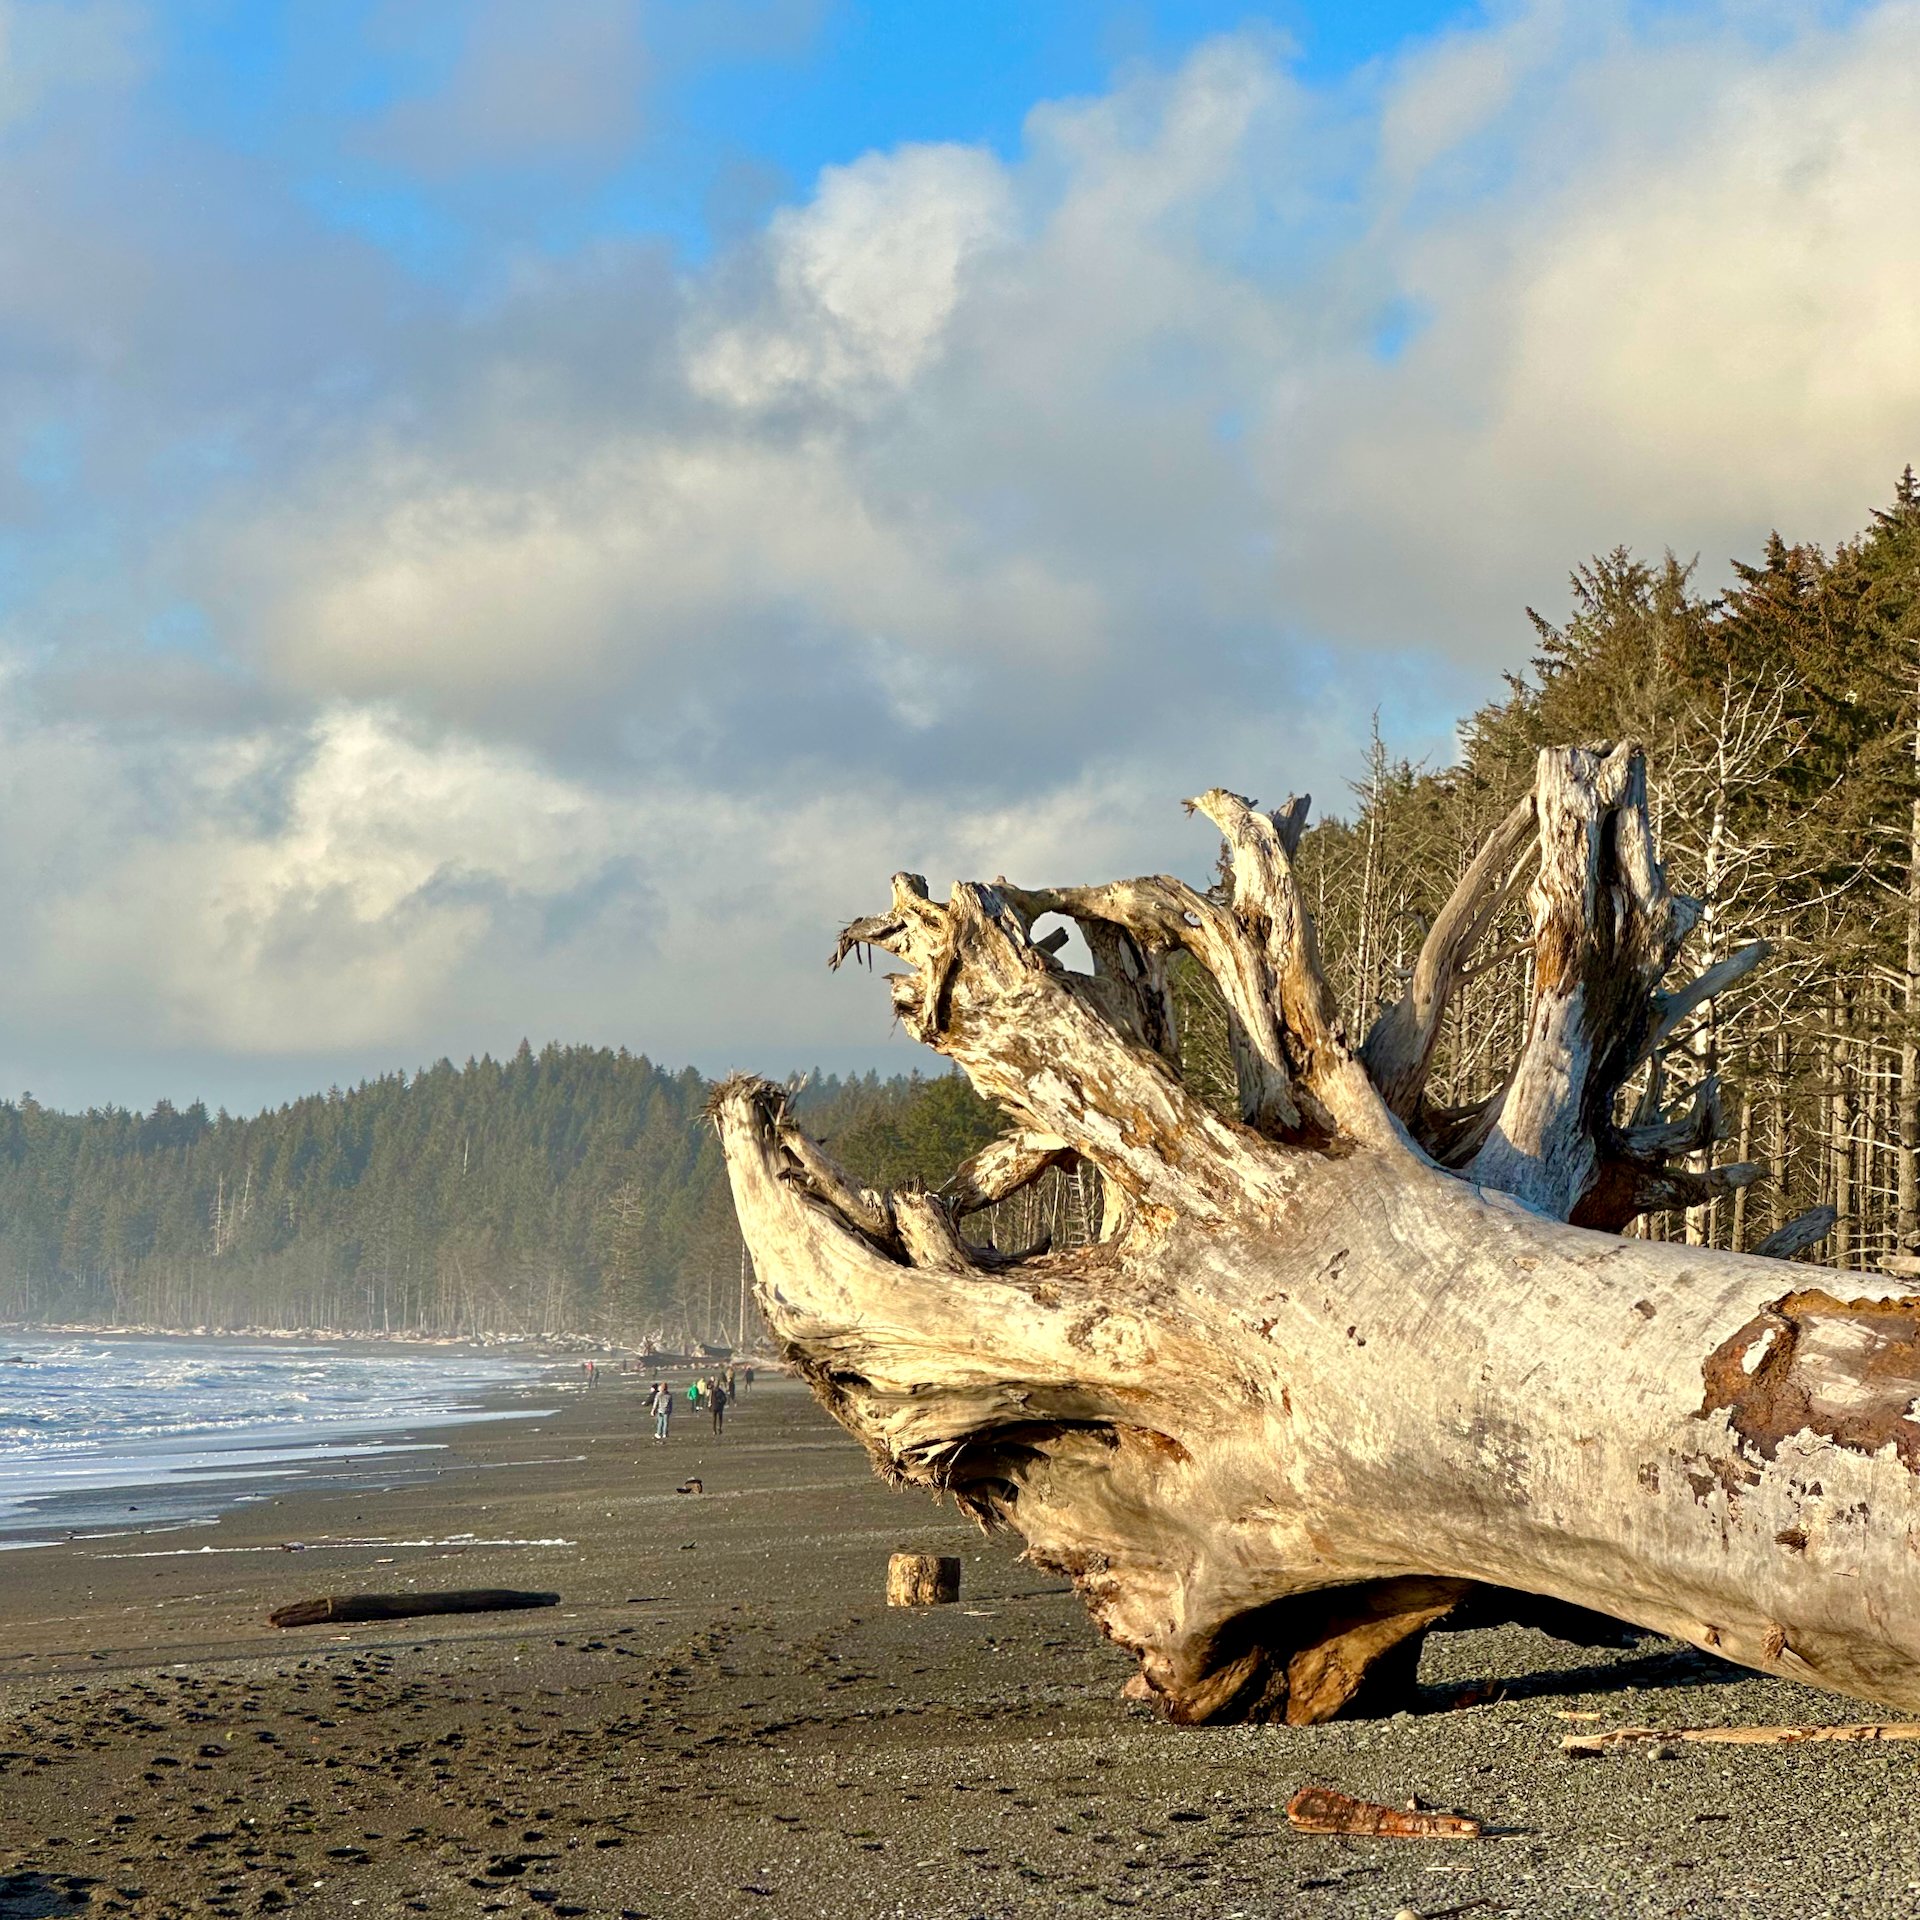  It’s a bit scary to think of the forces that pulled this tree out of the ground and washed it up on the beach. 